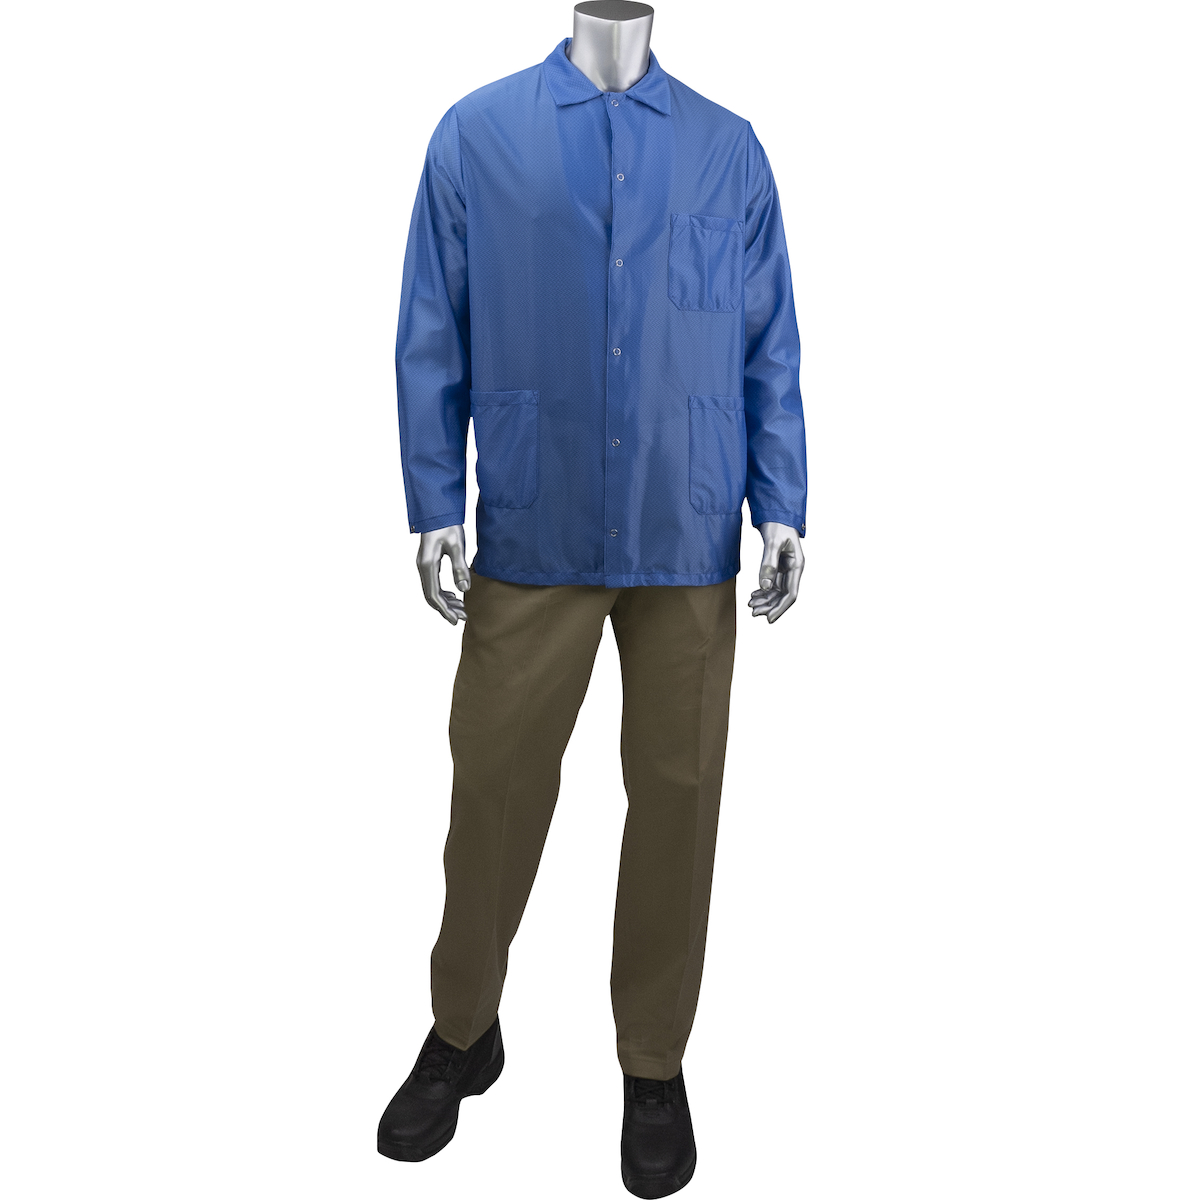 ESD Anti-Static Jacket with Lapel Collar and Knit Cuffs